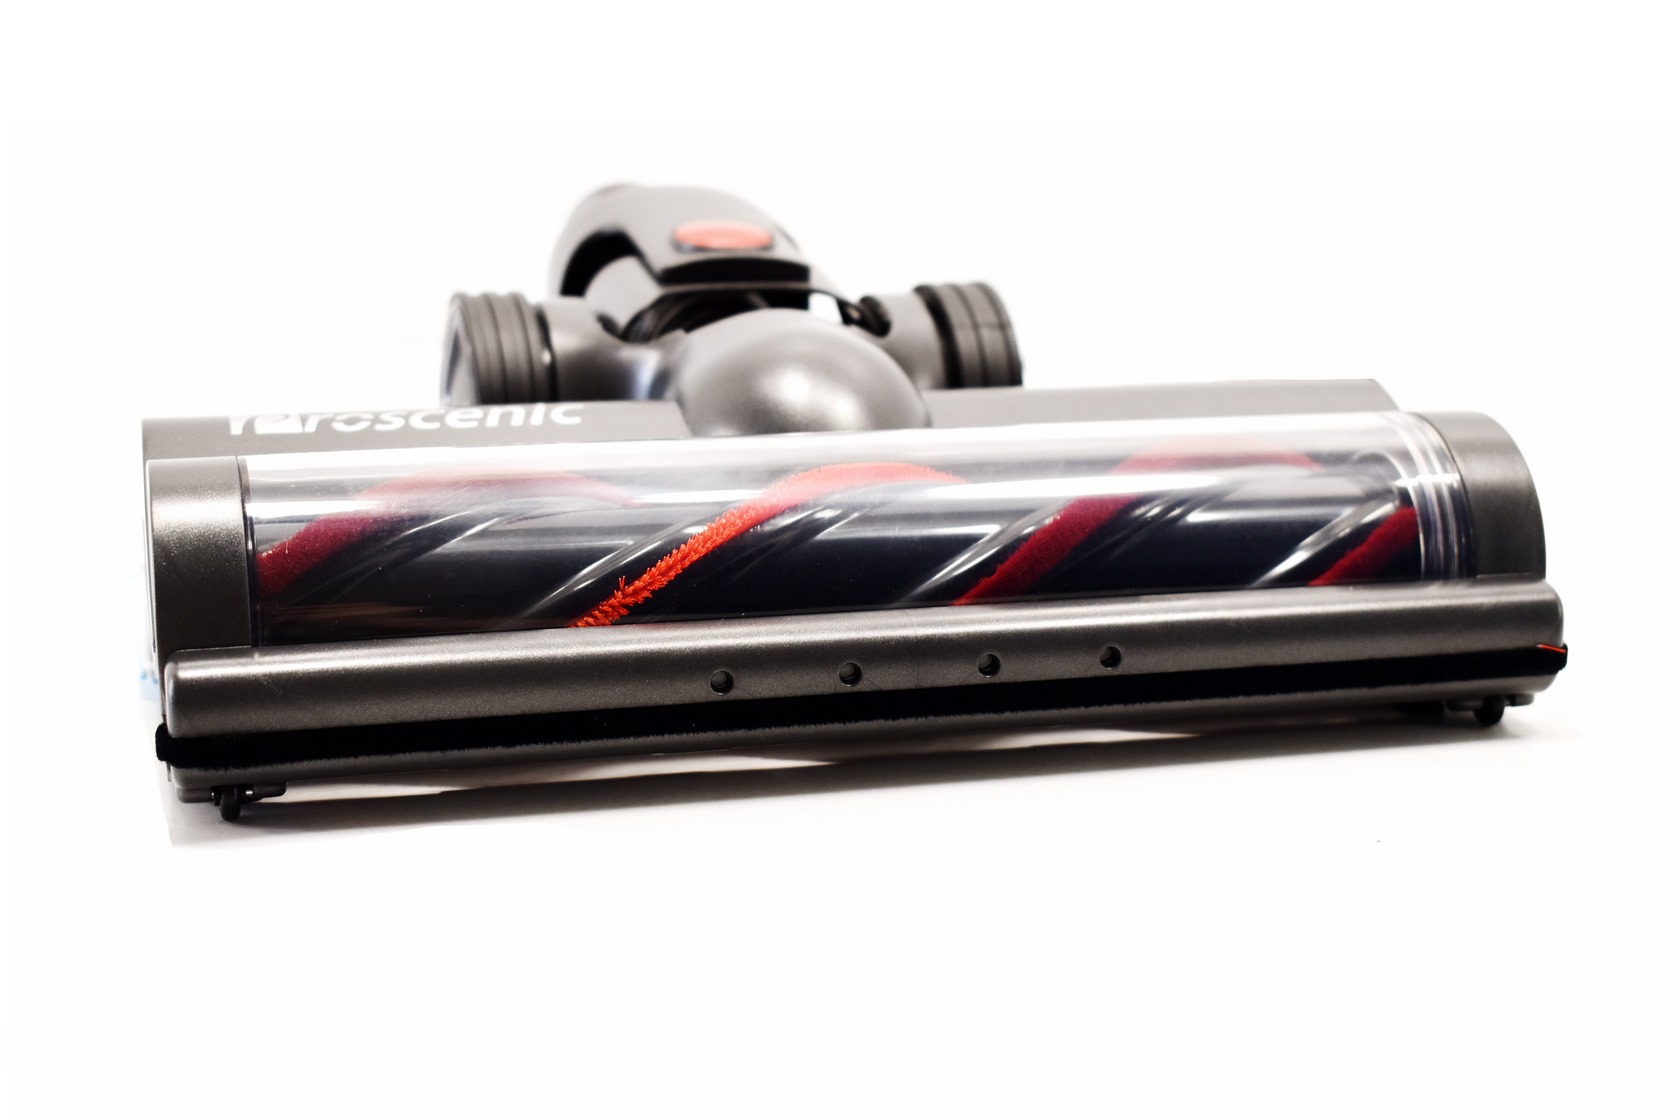 Proscenic P11 cordless vacuum review: Super suction specs don't result in  cleaner floors